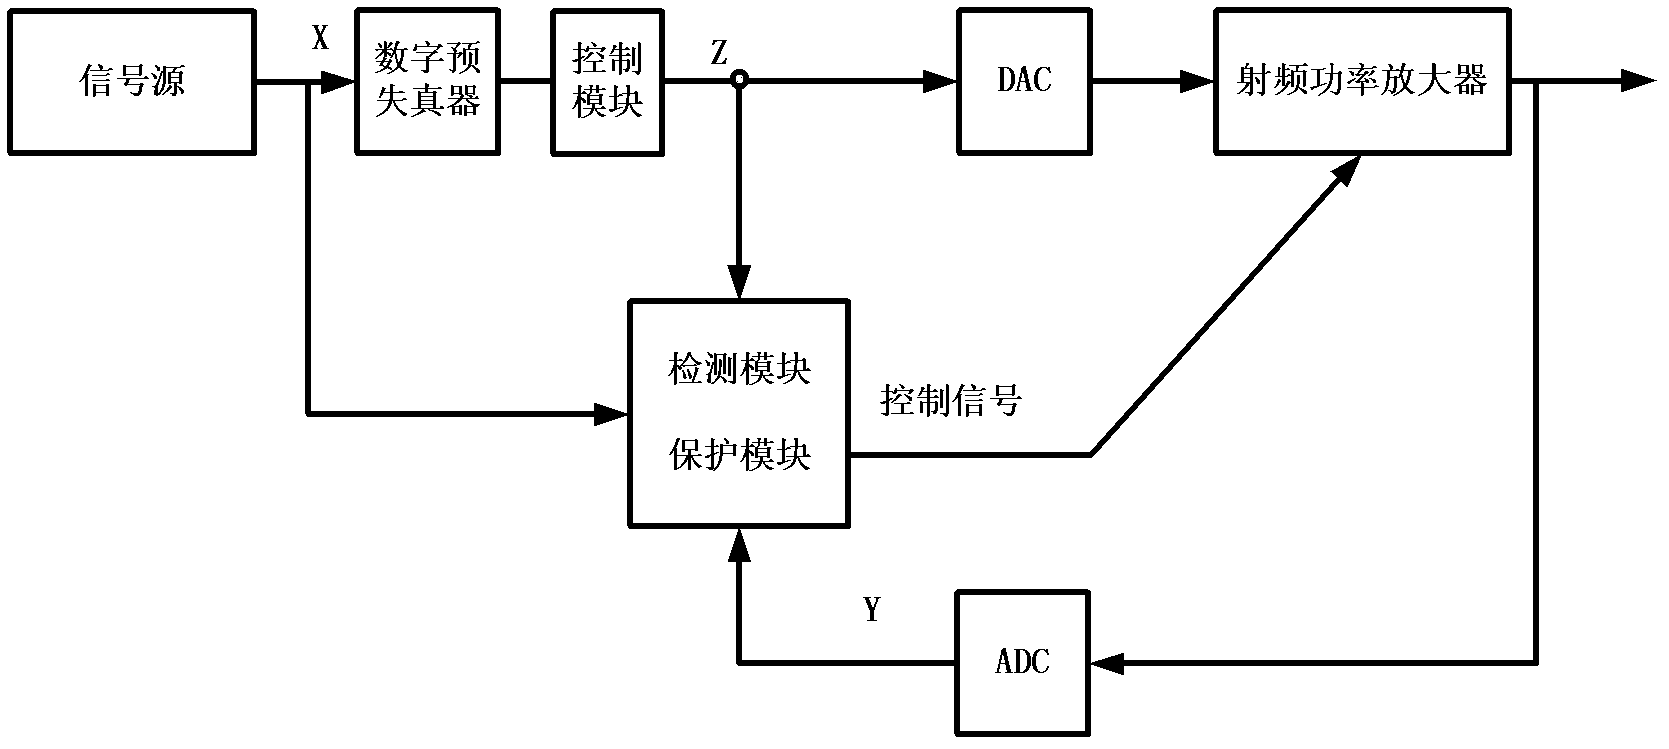 Protection method for radio frequency power amplifier and RRU (remote RF (radio frequency) unit)